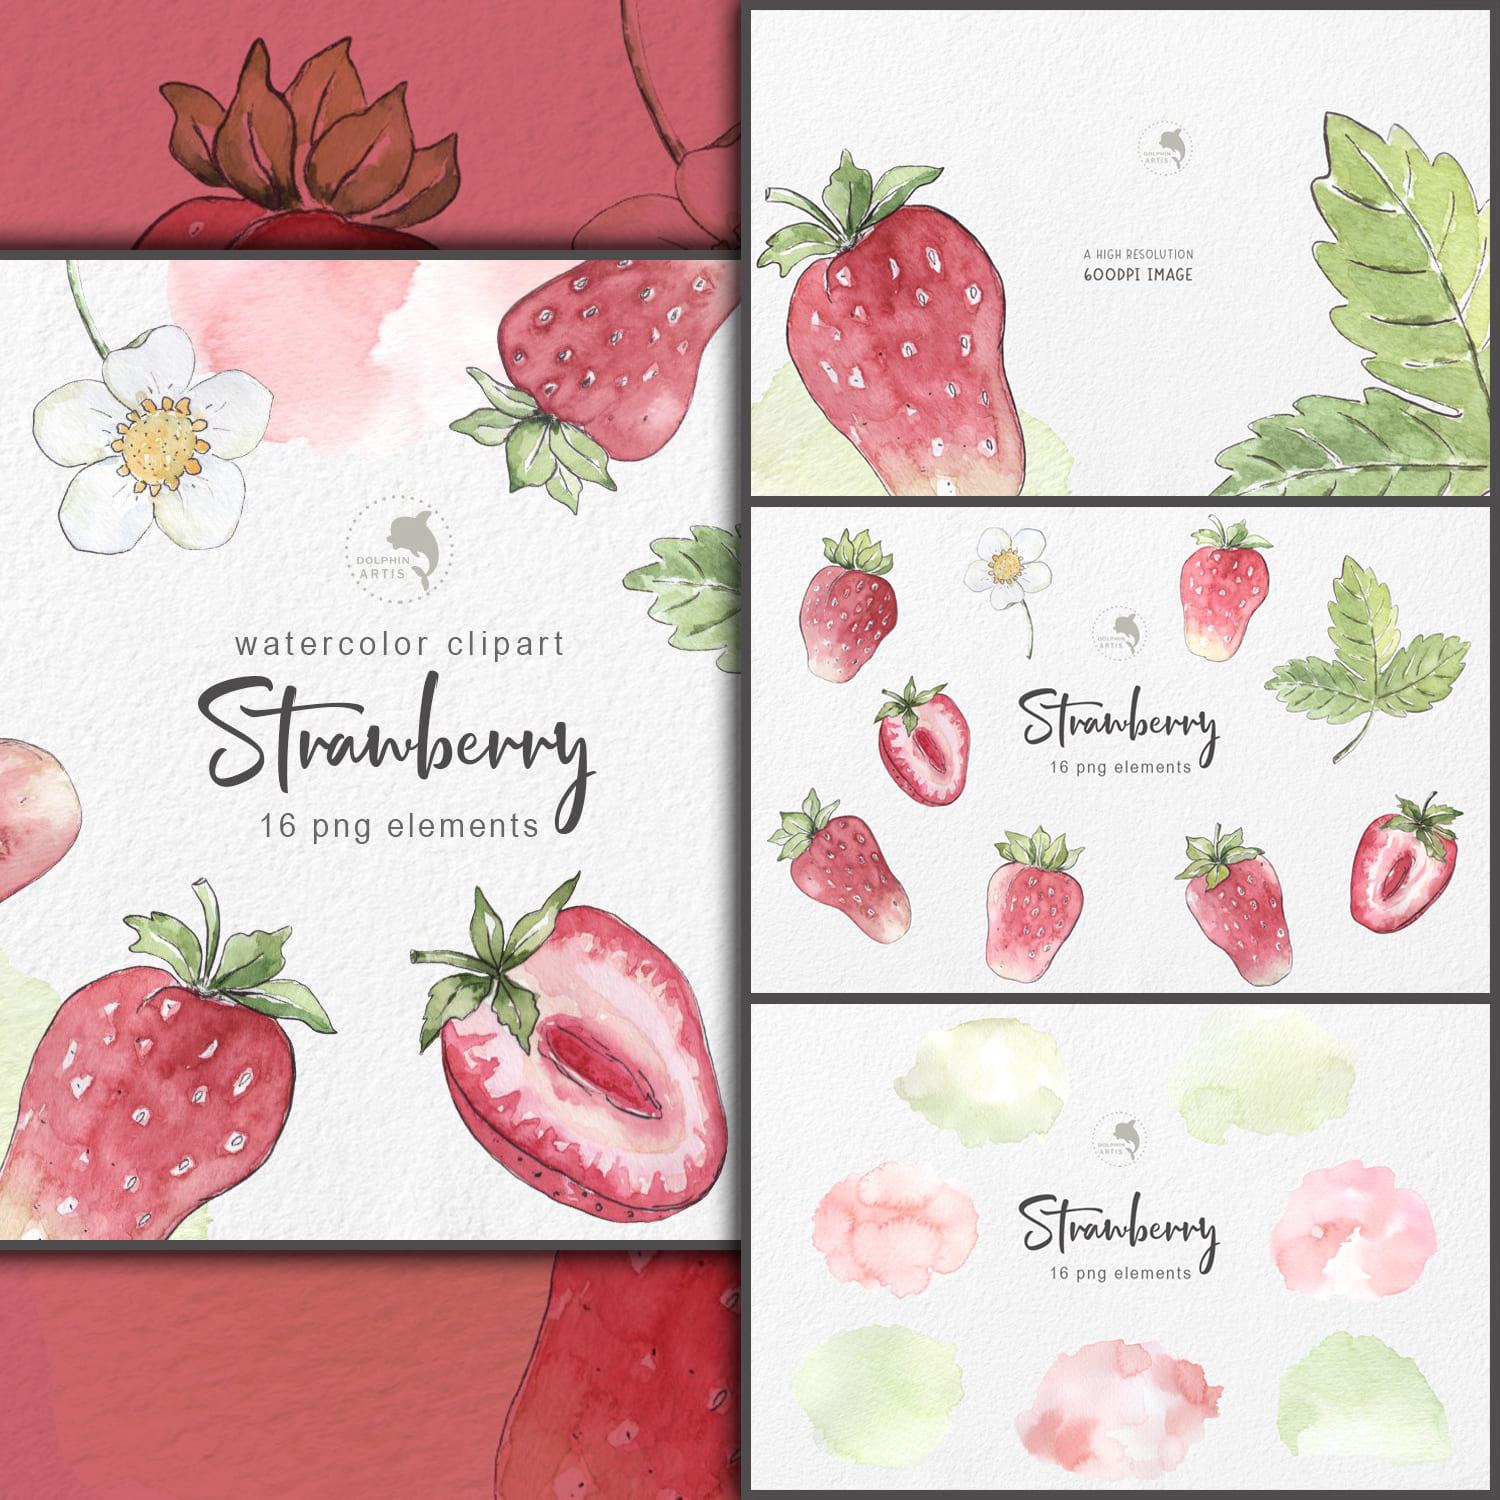 Four slides with watercolor translucent images of strawberries.